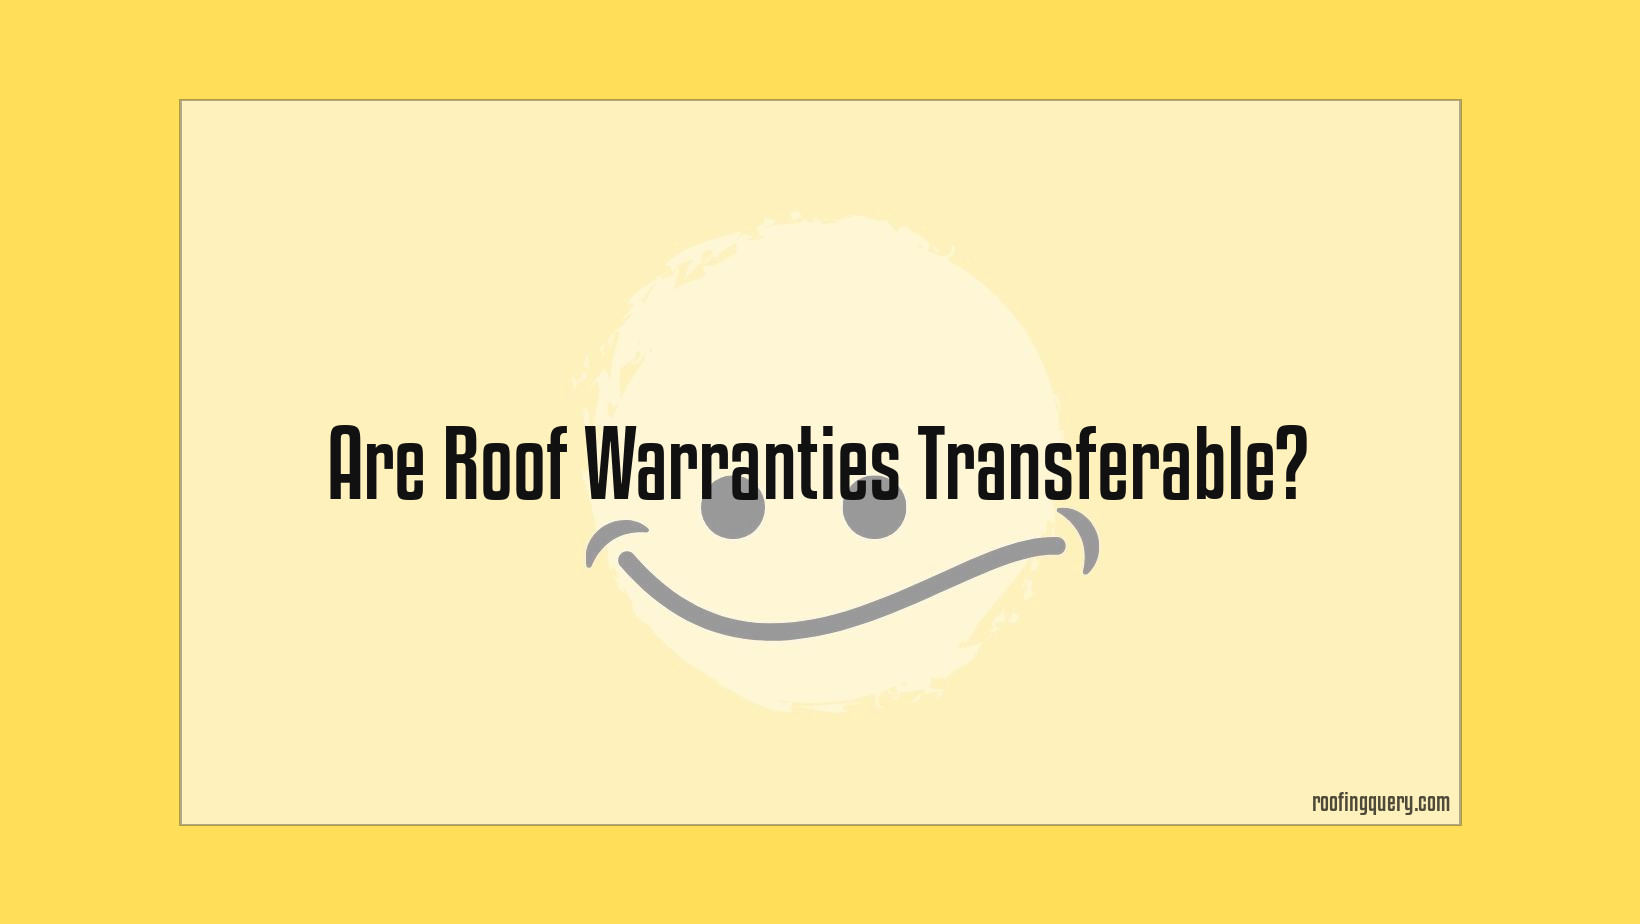 Are Roof Warranties Transferable